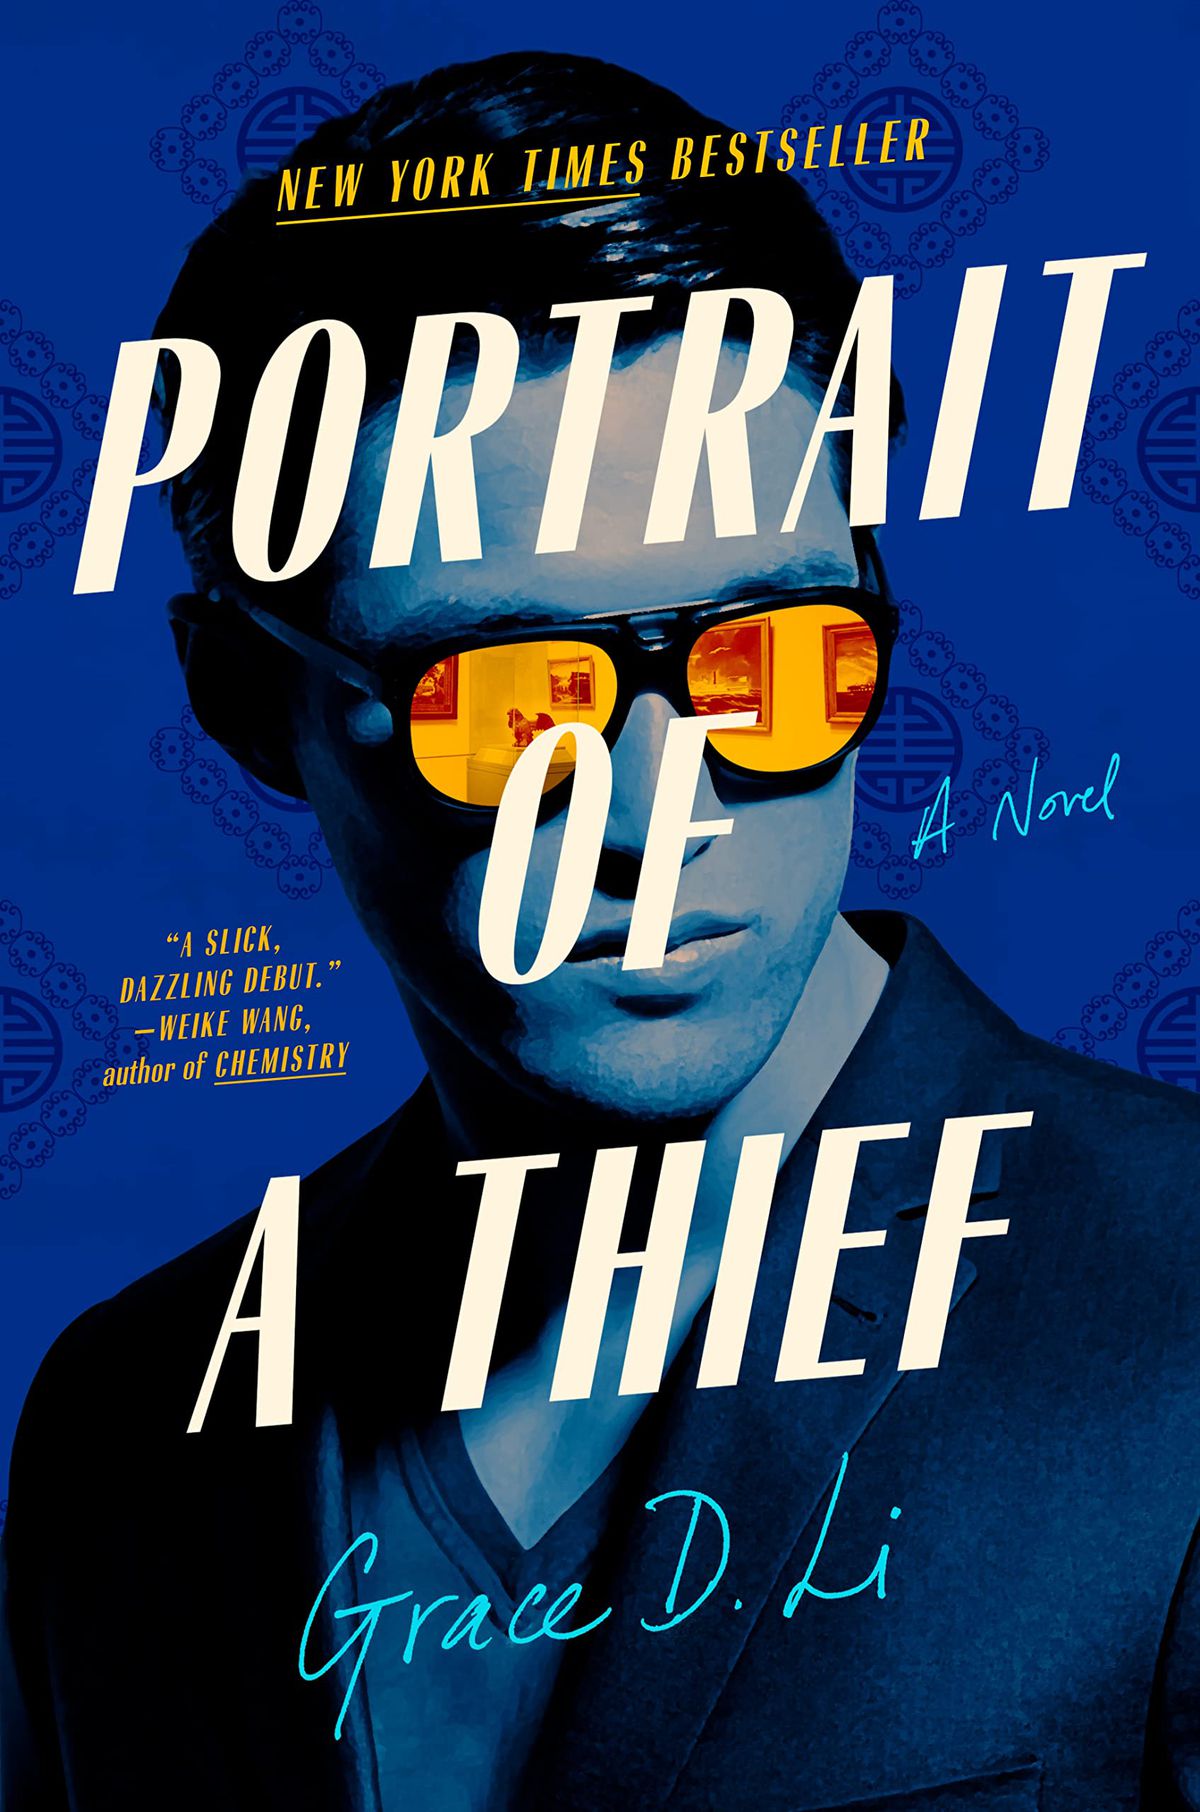 The cover for Portrait of a Thief, which shows the portrait of an Asian, with a blue wash, and bright orange reflective sunglasses.